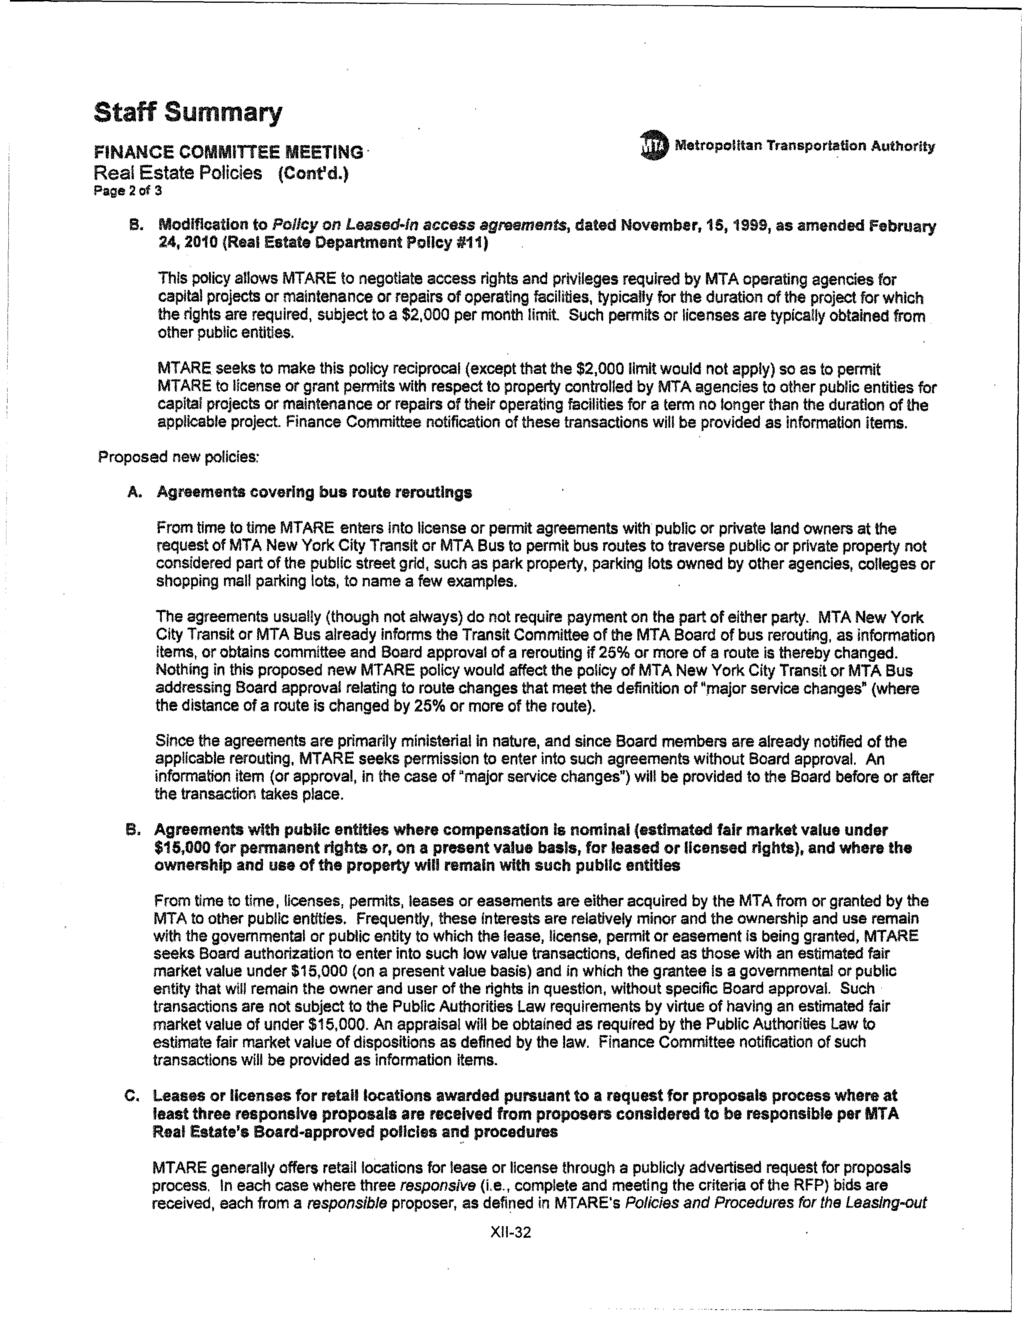 -- -- -- ------------------------' Staff Summary FINANCE COMMiTTEE MEETING' Real Estate Policies (Confd.) Page 20f 3 11 Metropolitan Transportation Authority B.